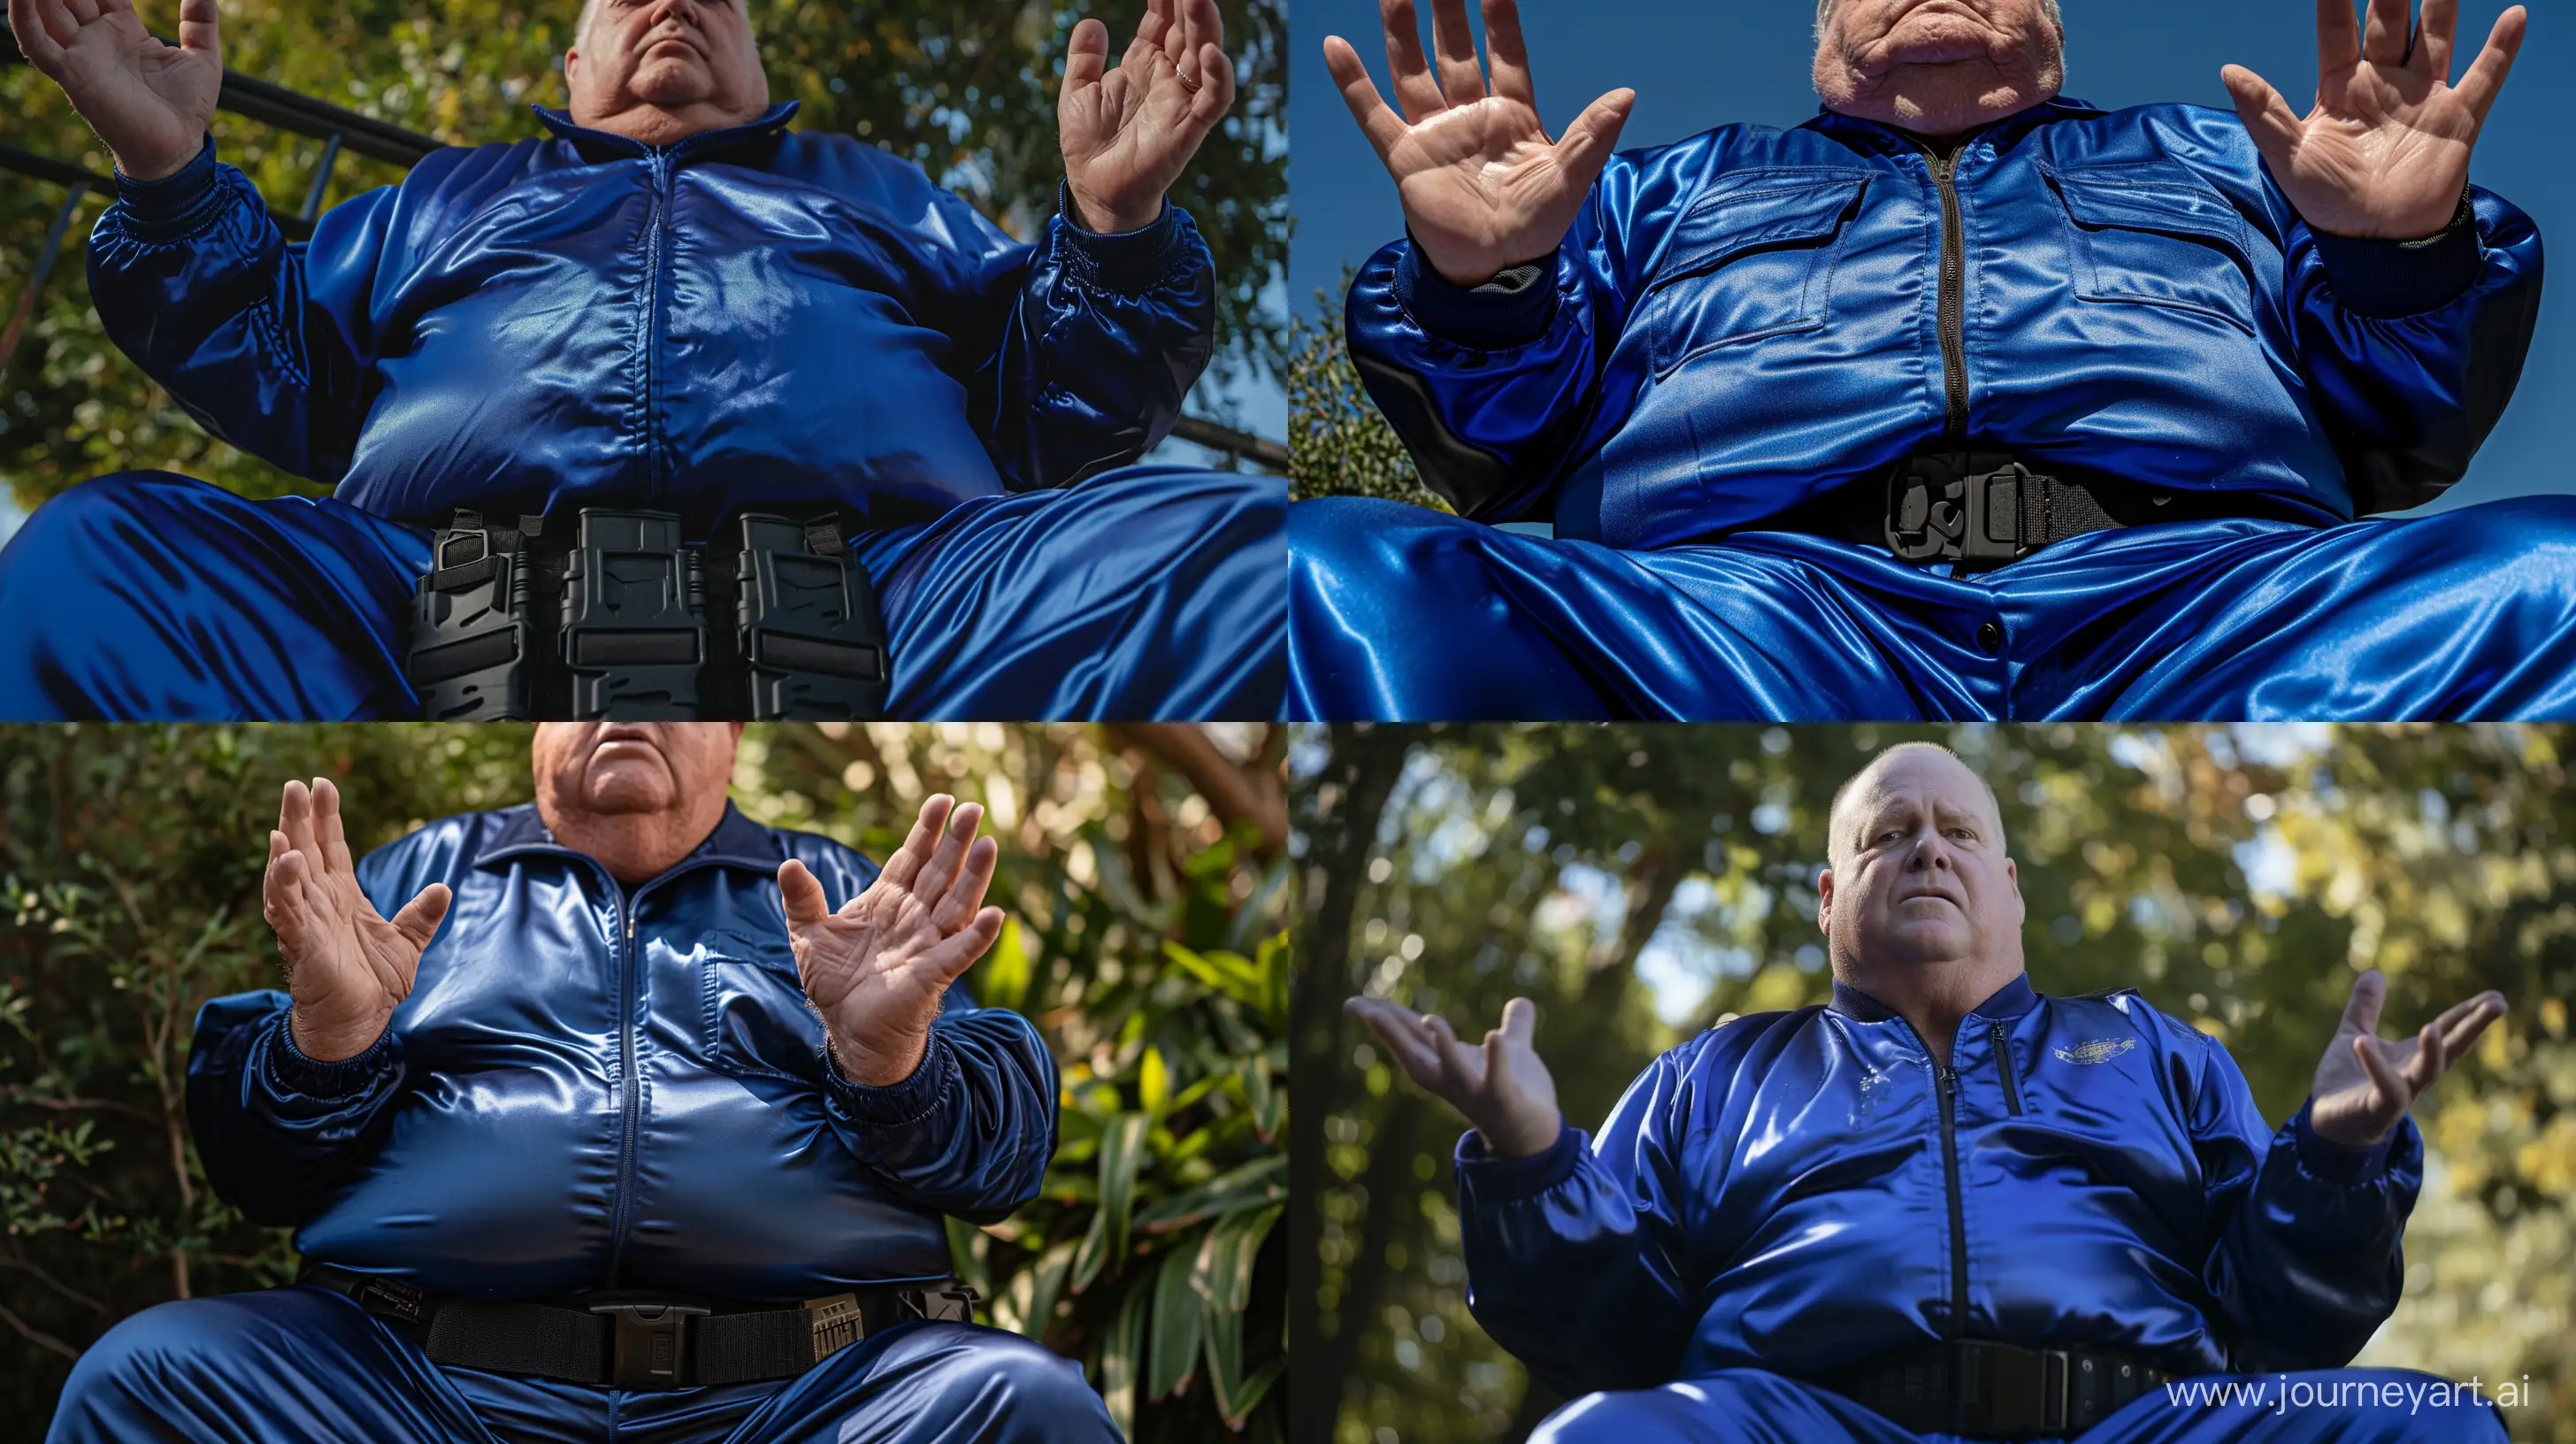 Chubby-70YearOld-Man-in-Royal-Blue-Silky-Tracksuit